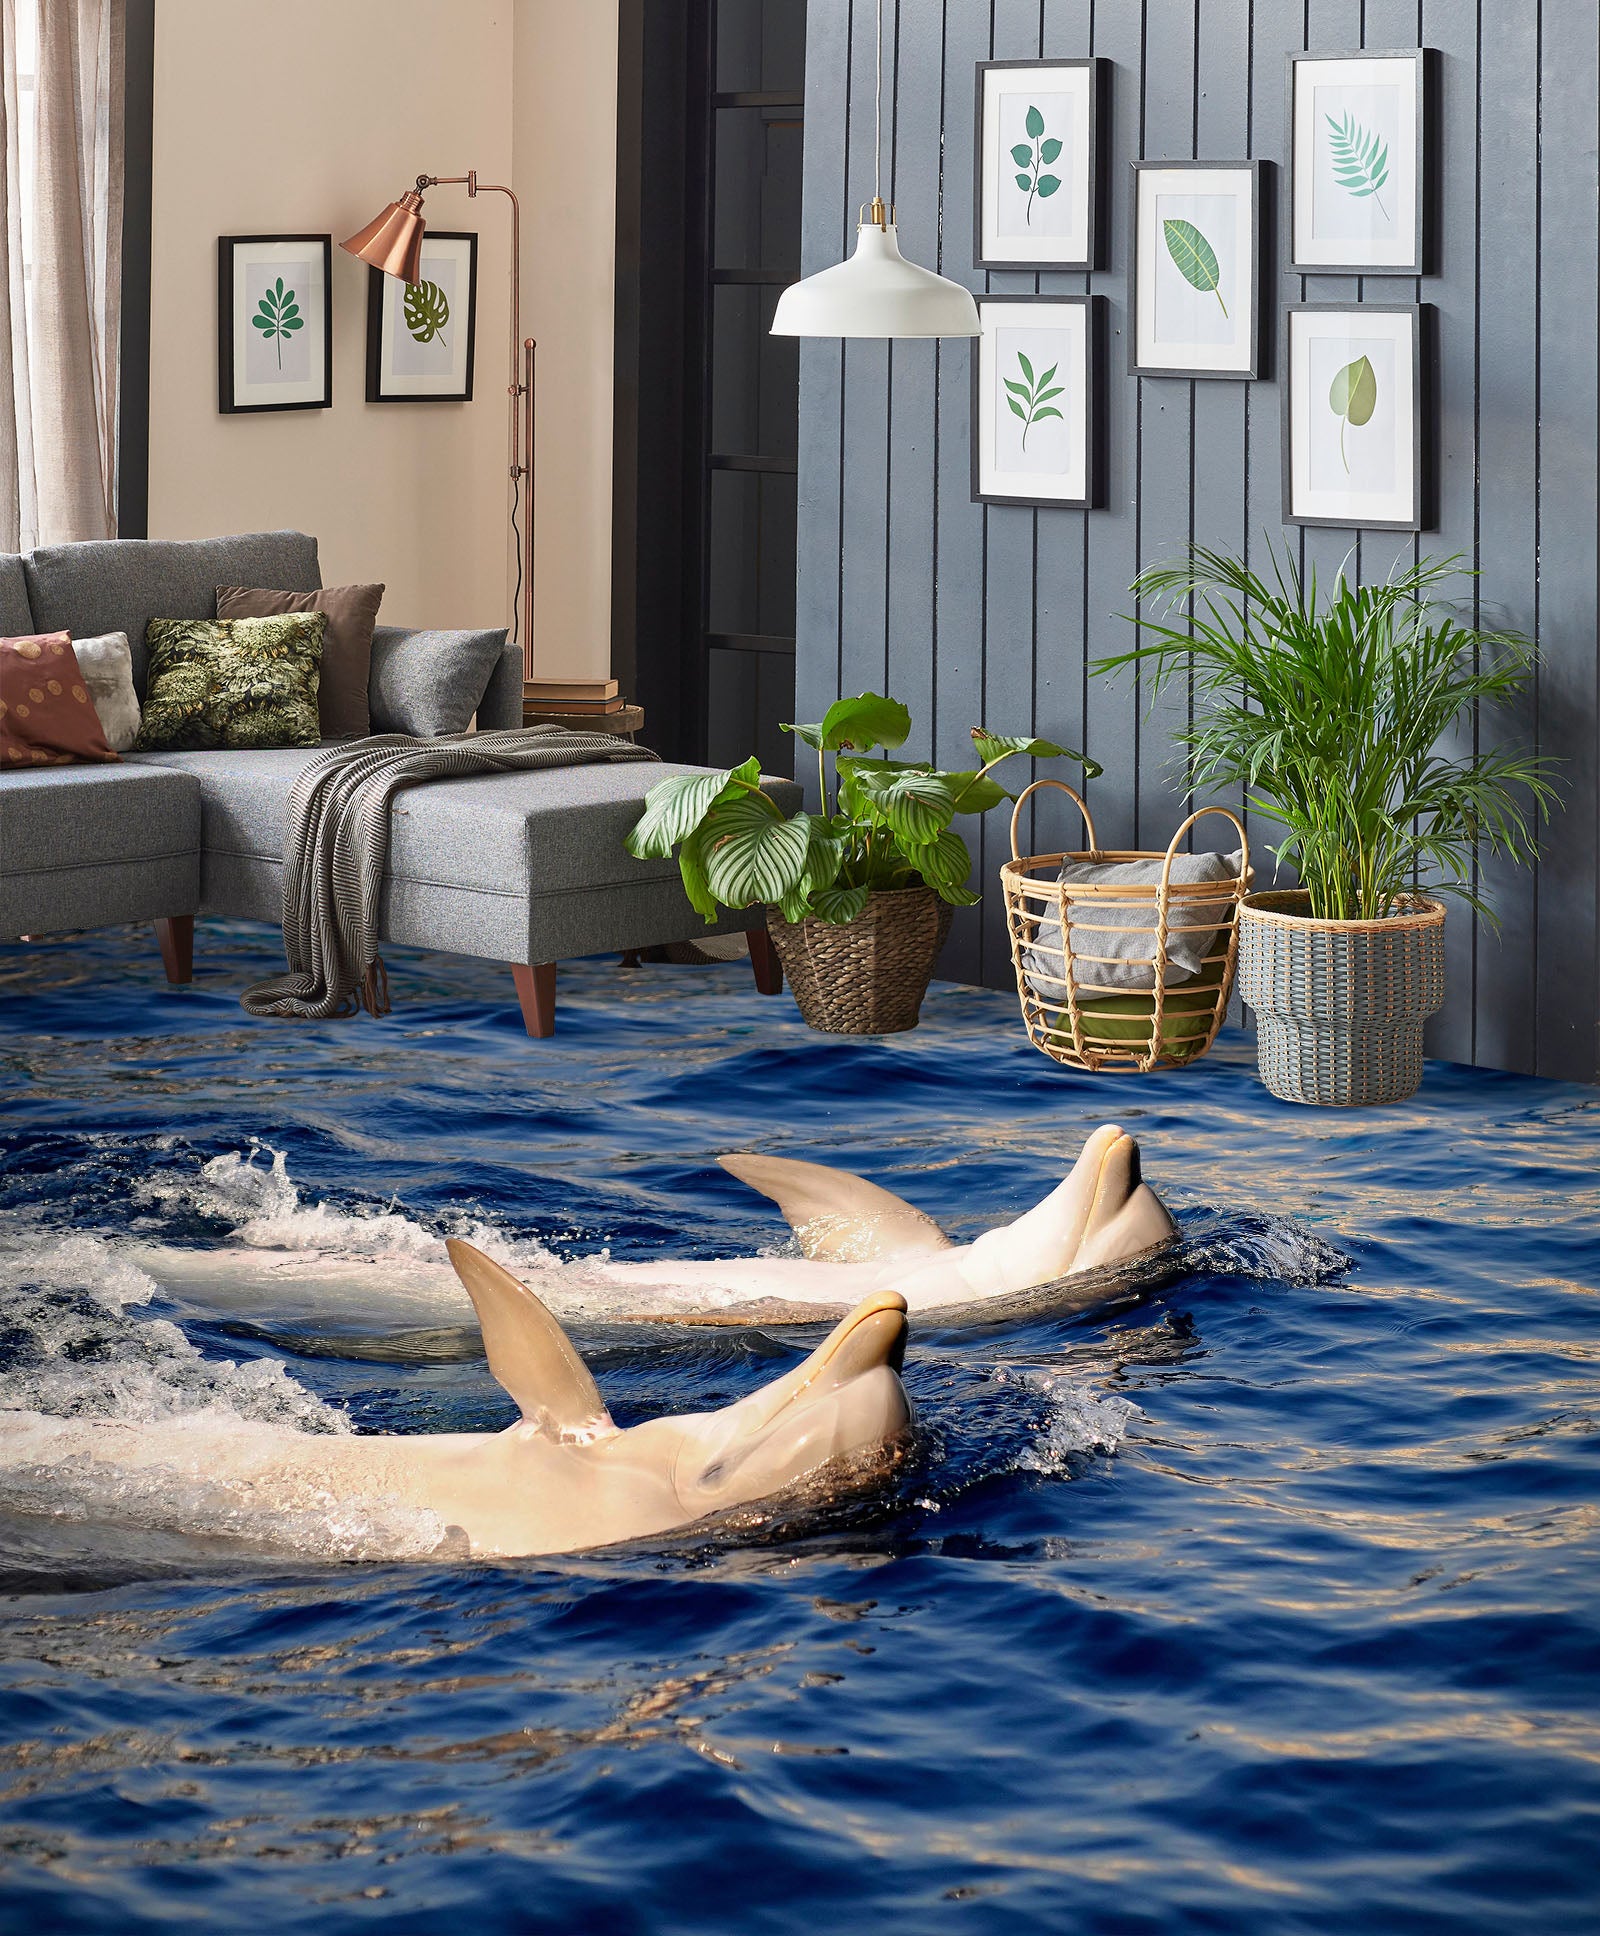 3D Leisurely Dolphins 1211 Floor Mural  Wallpaper Murals Self-Adhesive Removable Print Epoxy